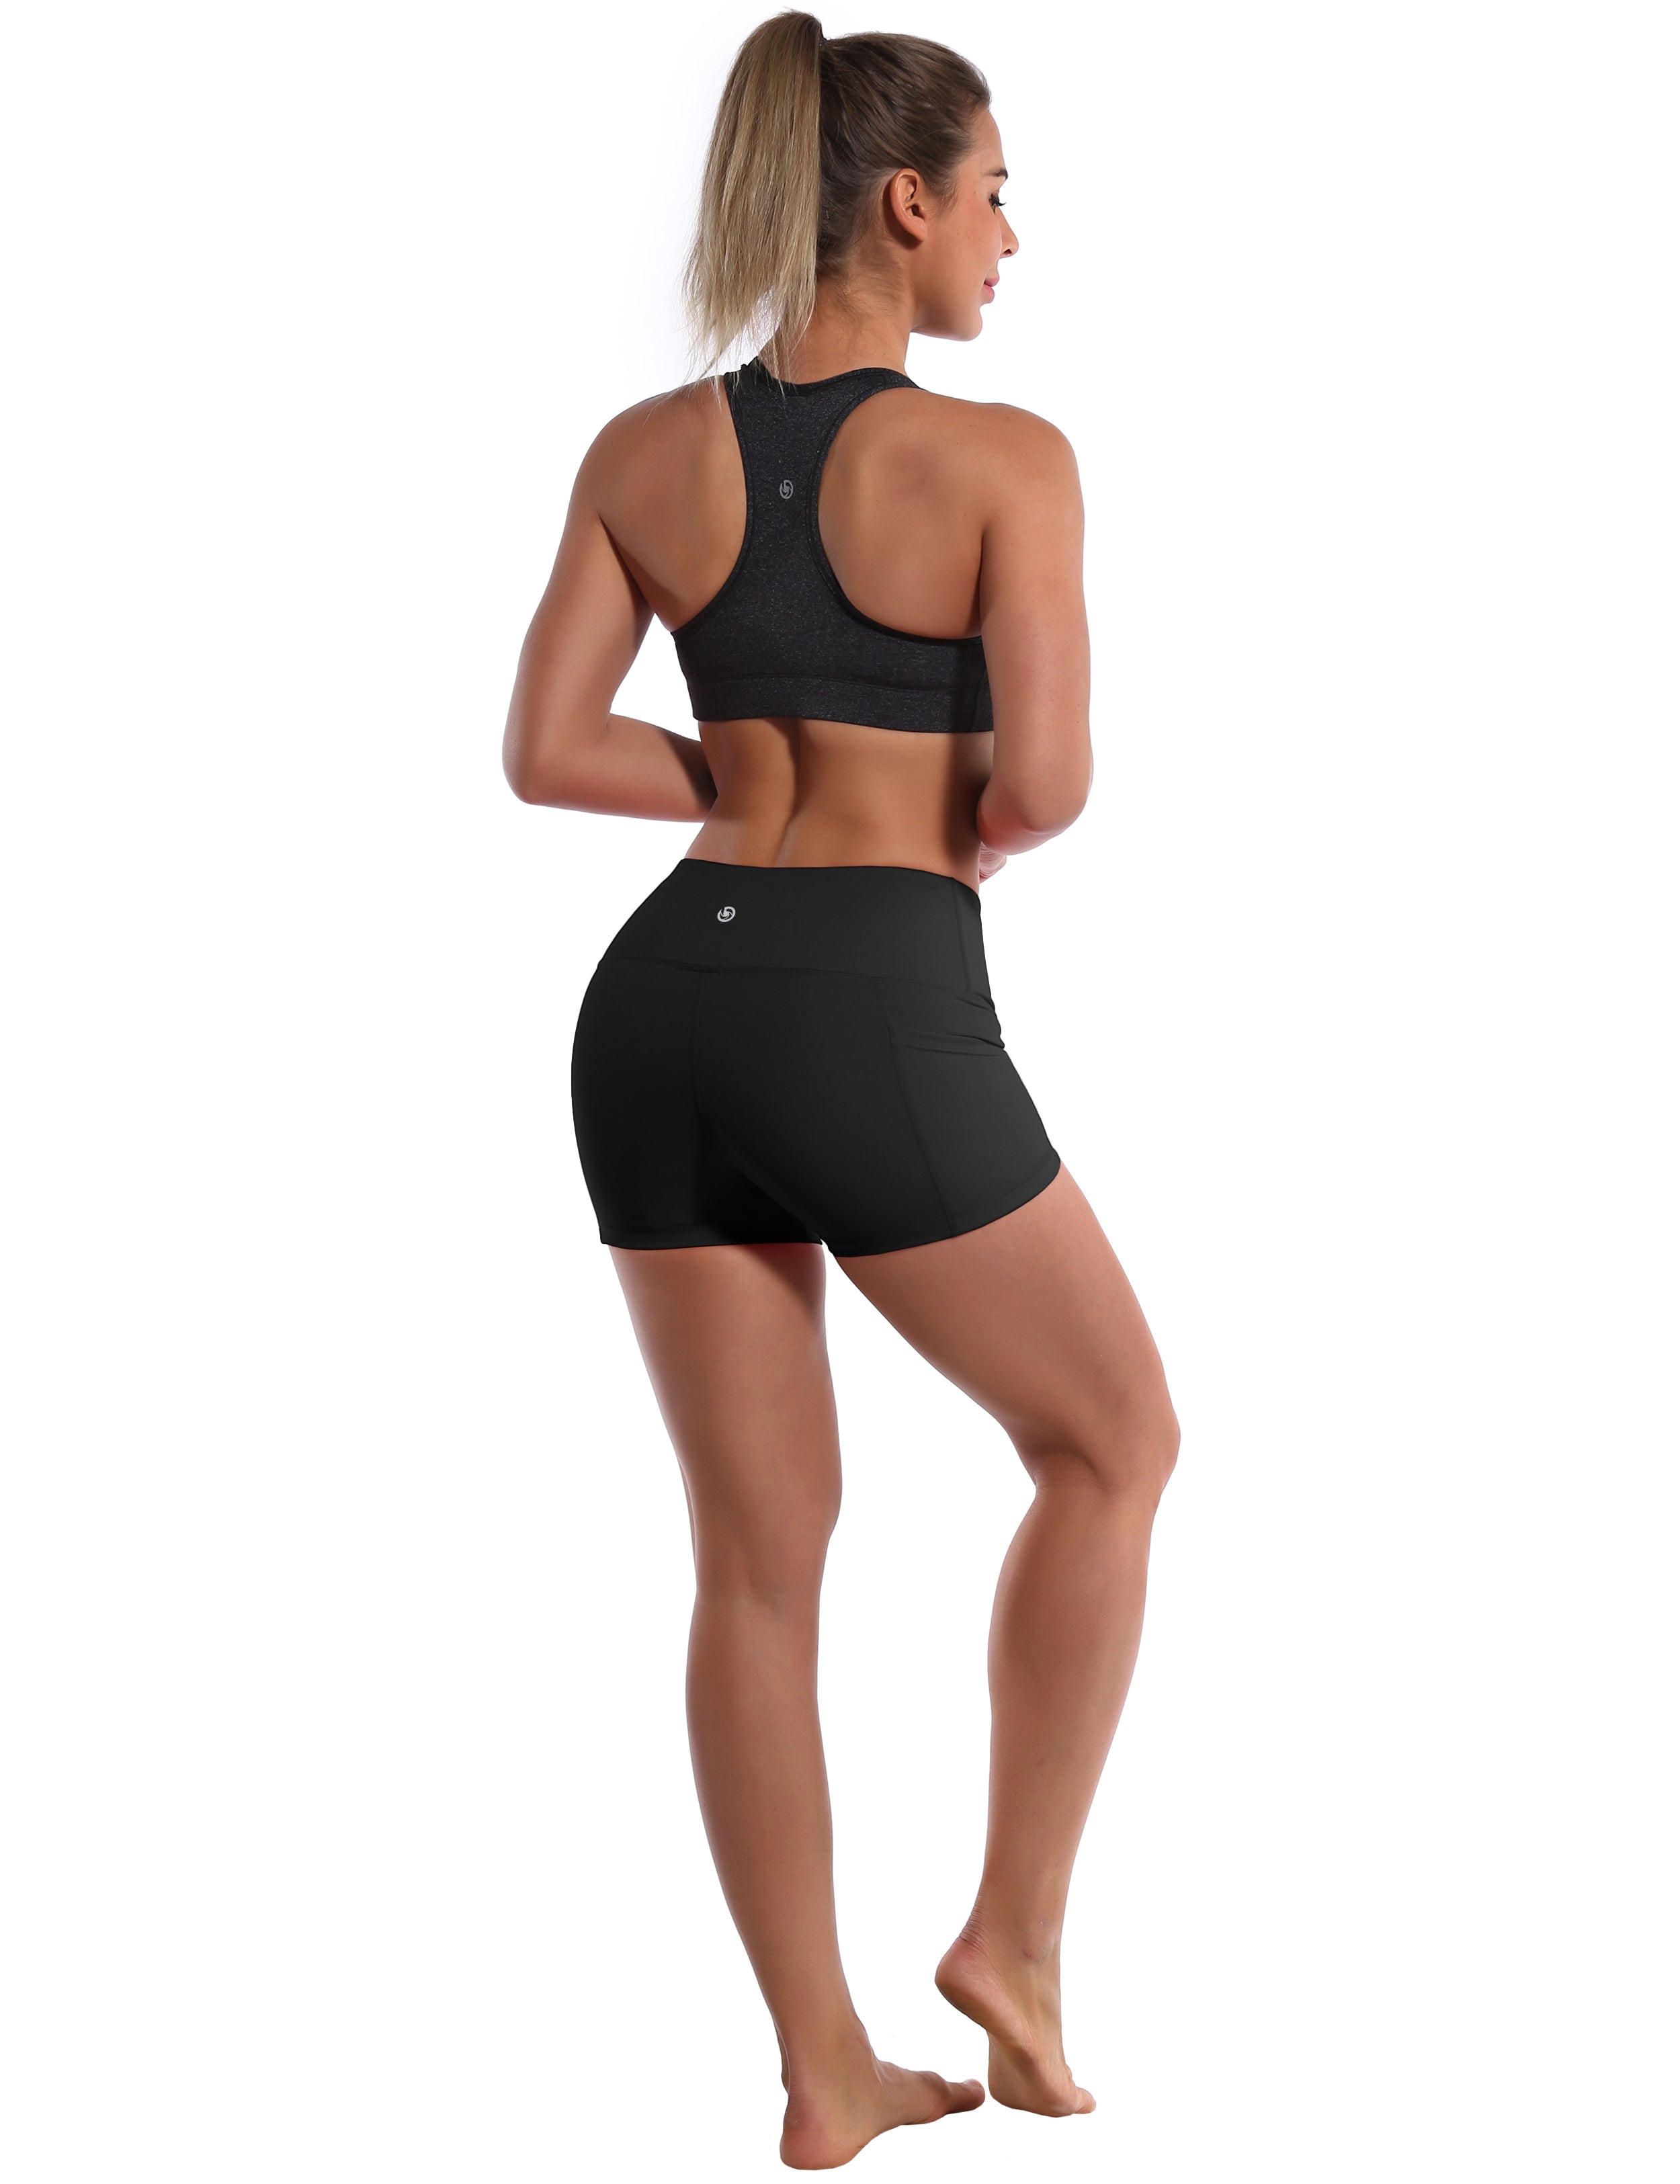 2.5" Side Pockets Biking Shorts black Sleek, soft, smooth and totally comfortable: our newest sexy style is here. Softest-ever fabric High elasticity High density 4-way stretch Fabric doesn't attract lint easily No see-through Moisture-wicking Machine wash 78% Polyester, 22% Spandex